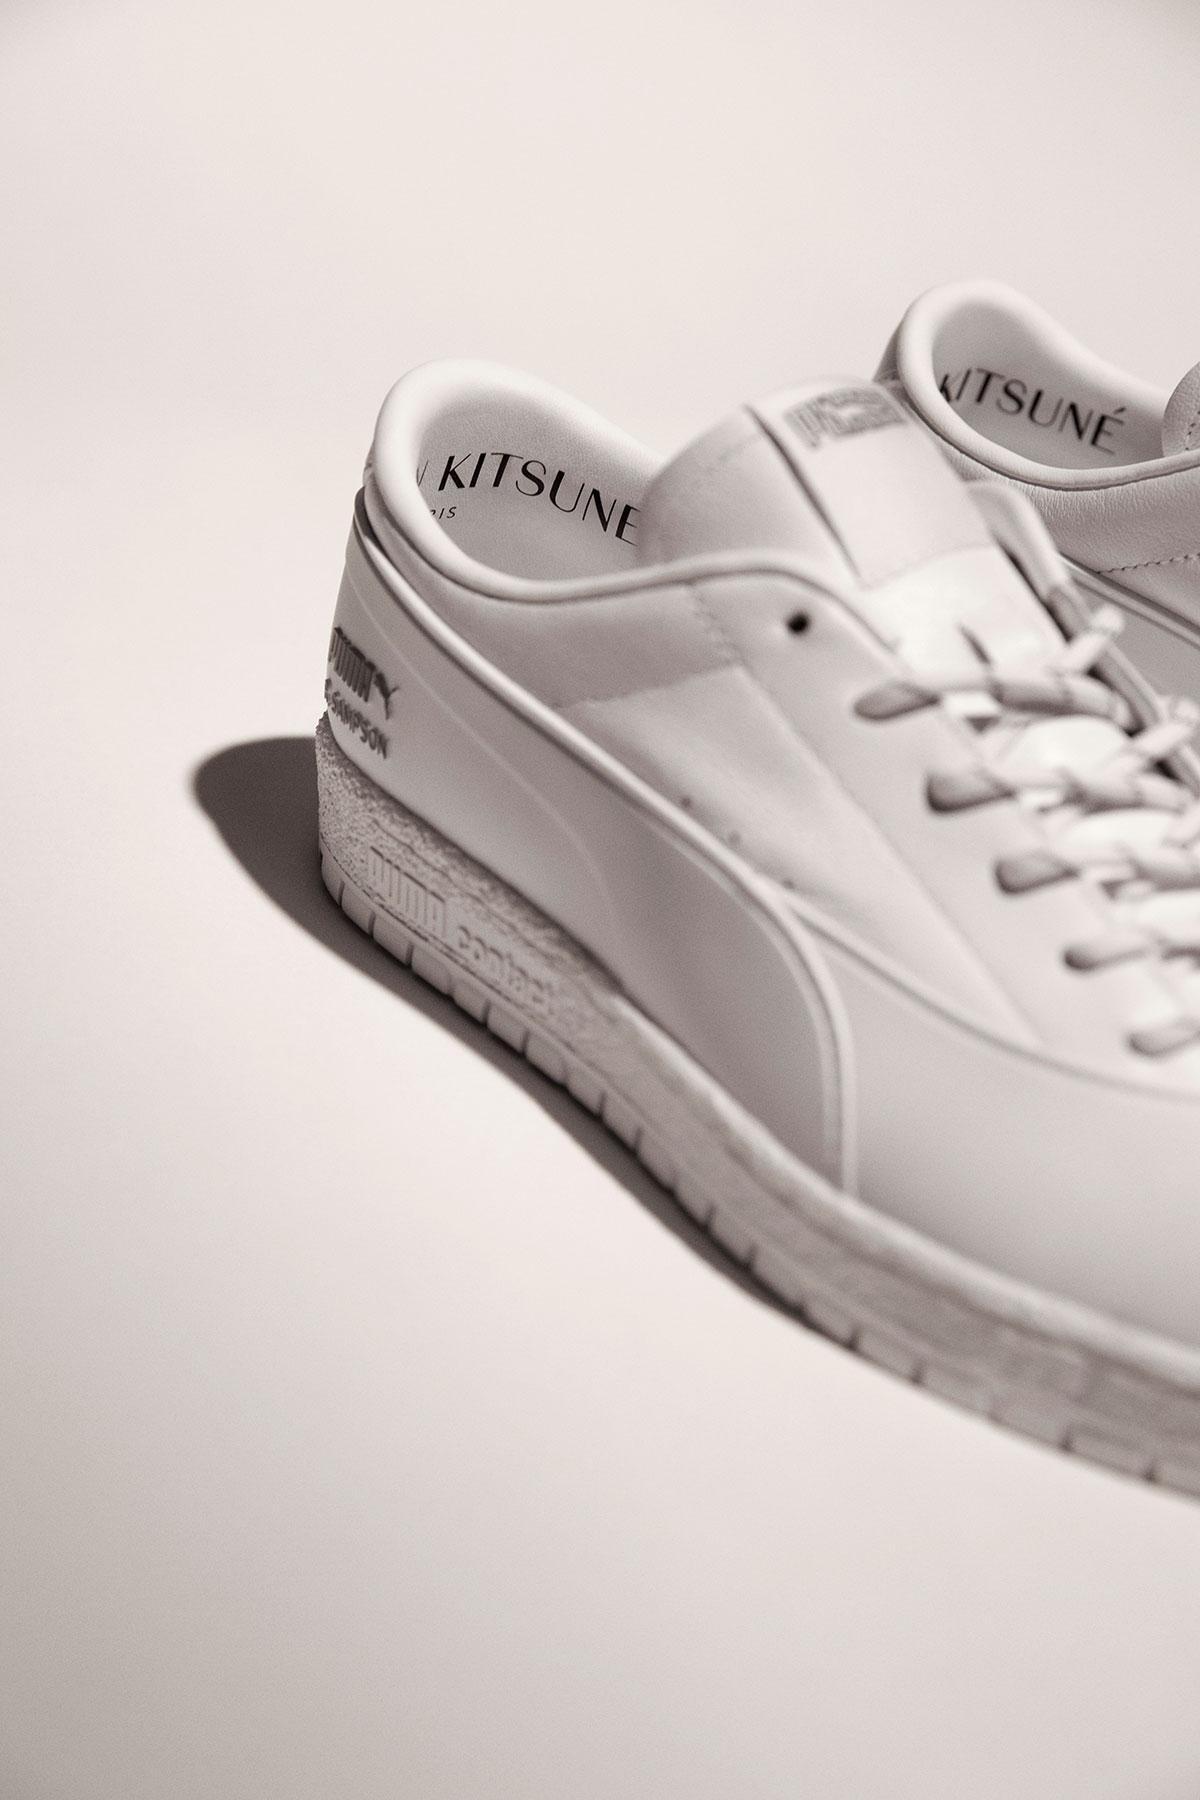 PUMA x MAISON KITSUNÉ Debut First Collection Together